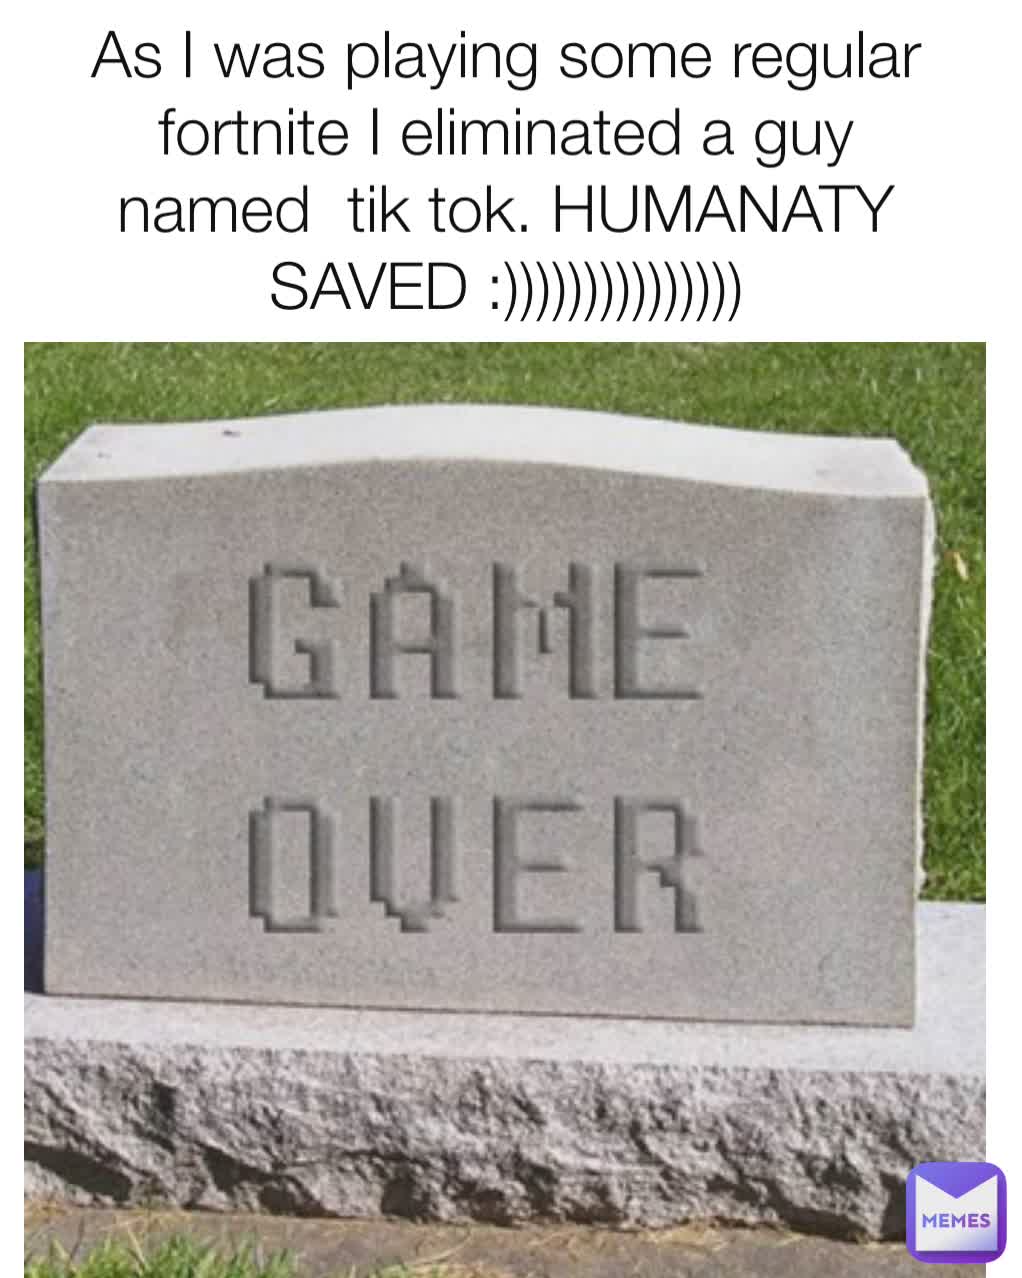 As I was playing some regular fortnite I eliminated a guy named  tik tok. HUMANATY SAVED :)))))))))))))))